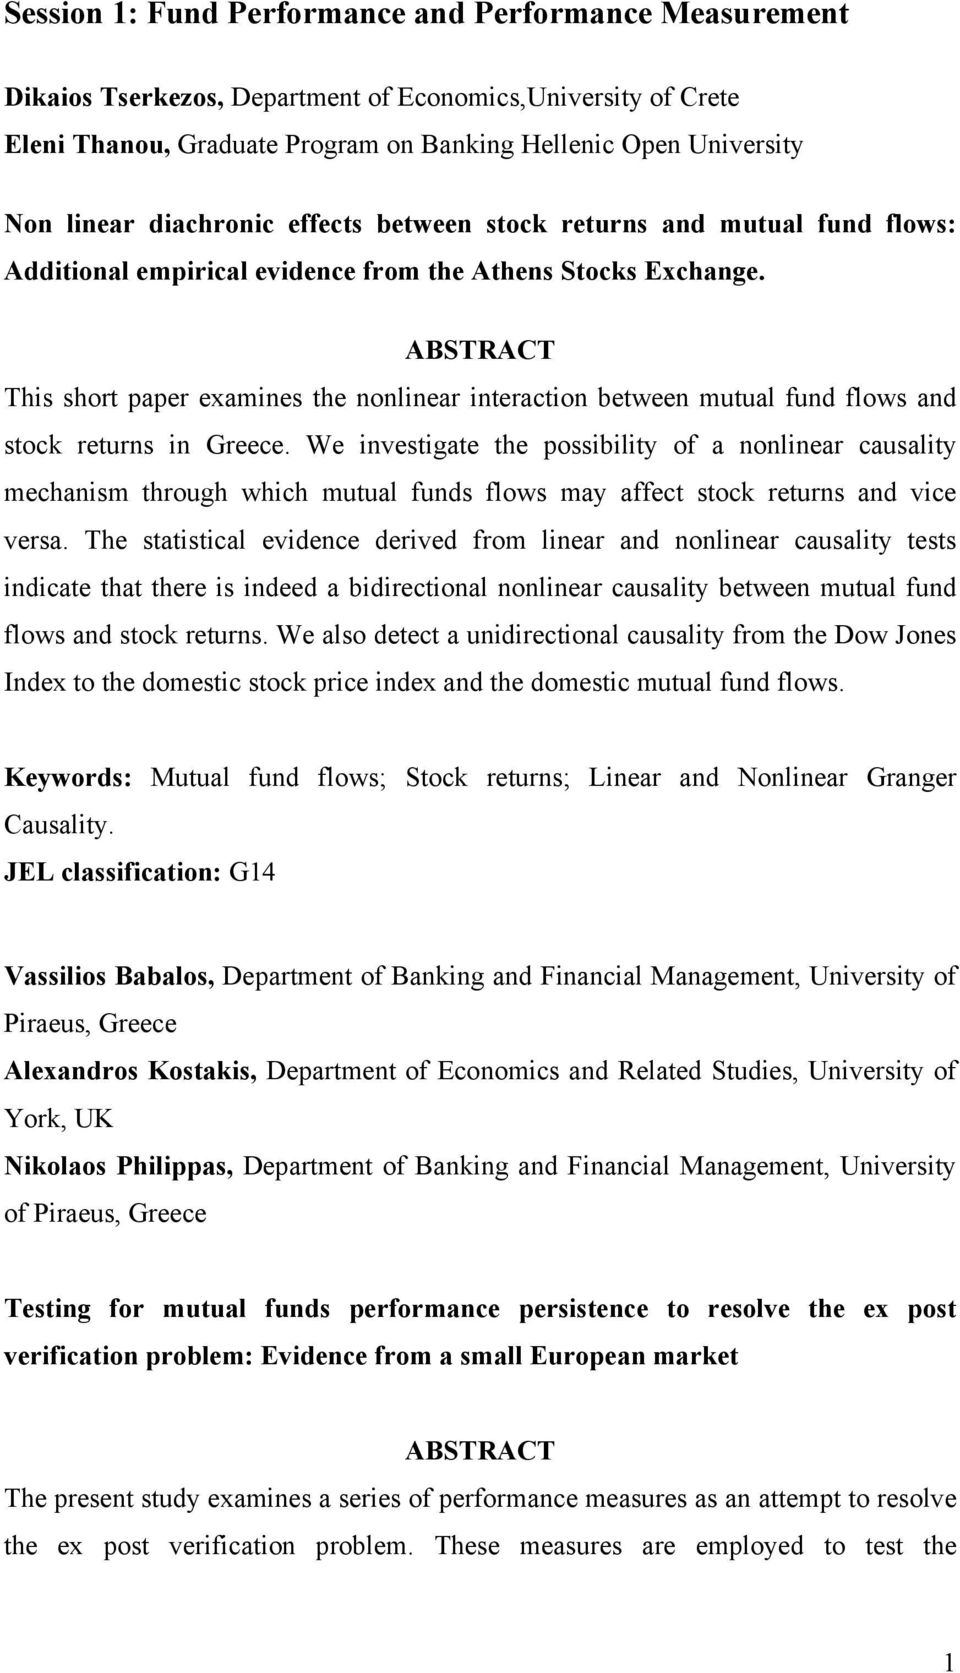 This short paper examines the nonlinear interaction between mutual fund flows and stock returns in Greece.